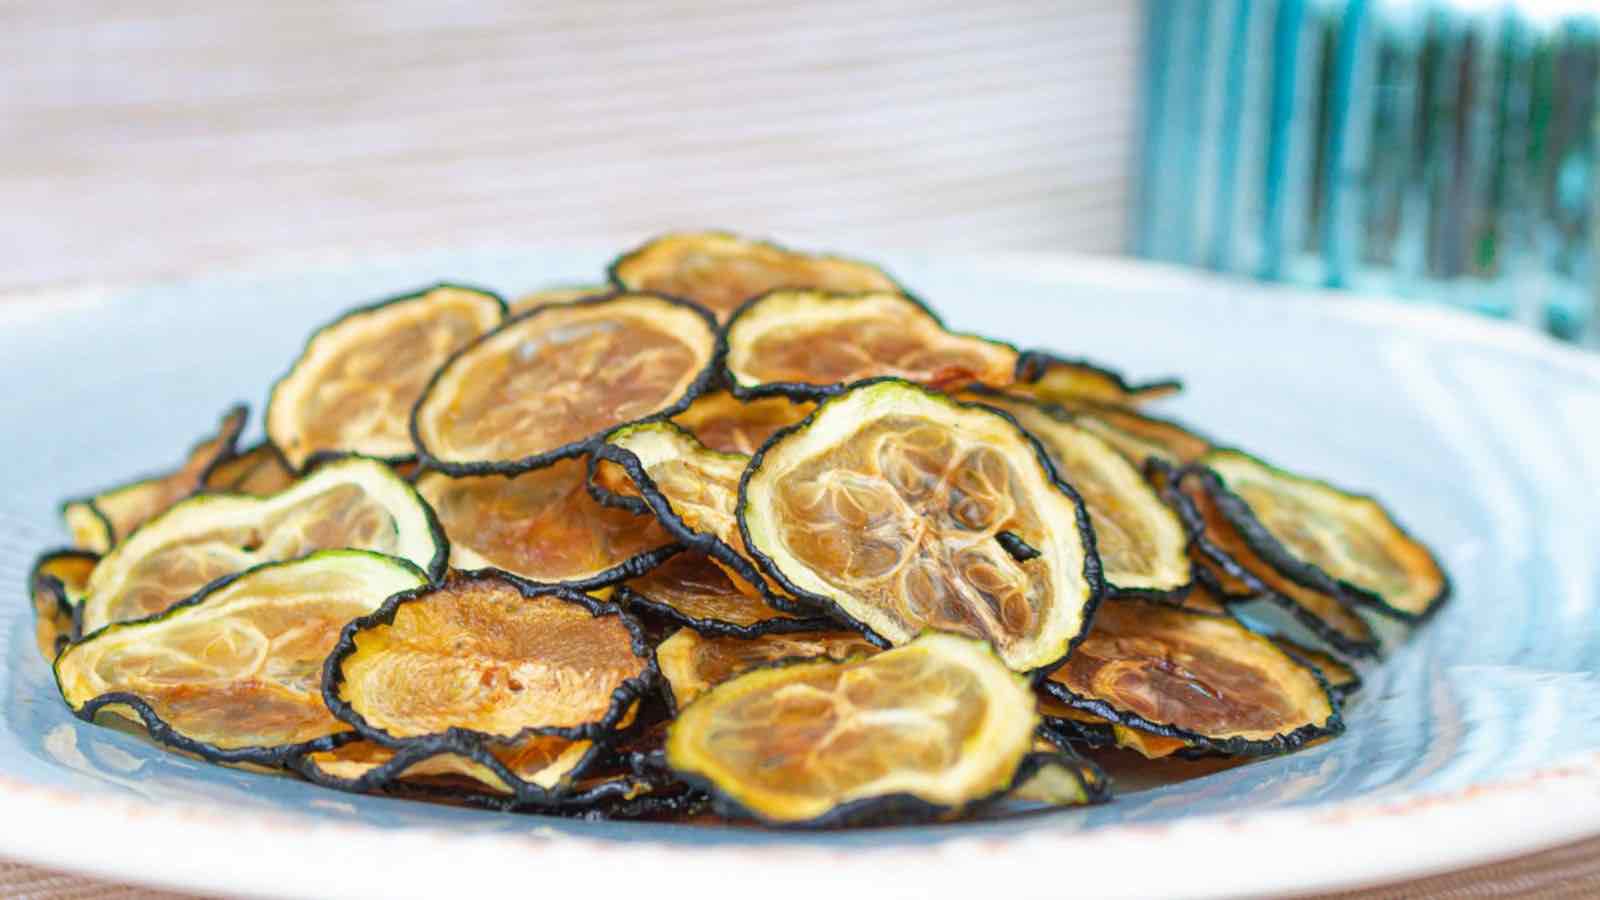 Zucchini chips on a plate.